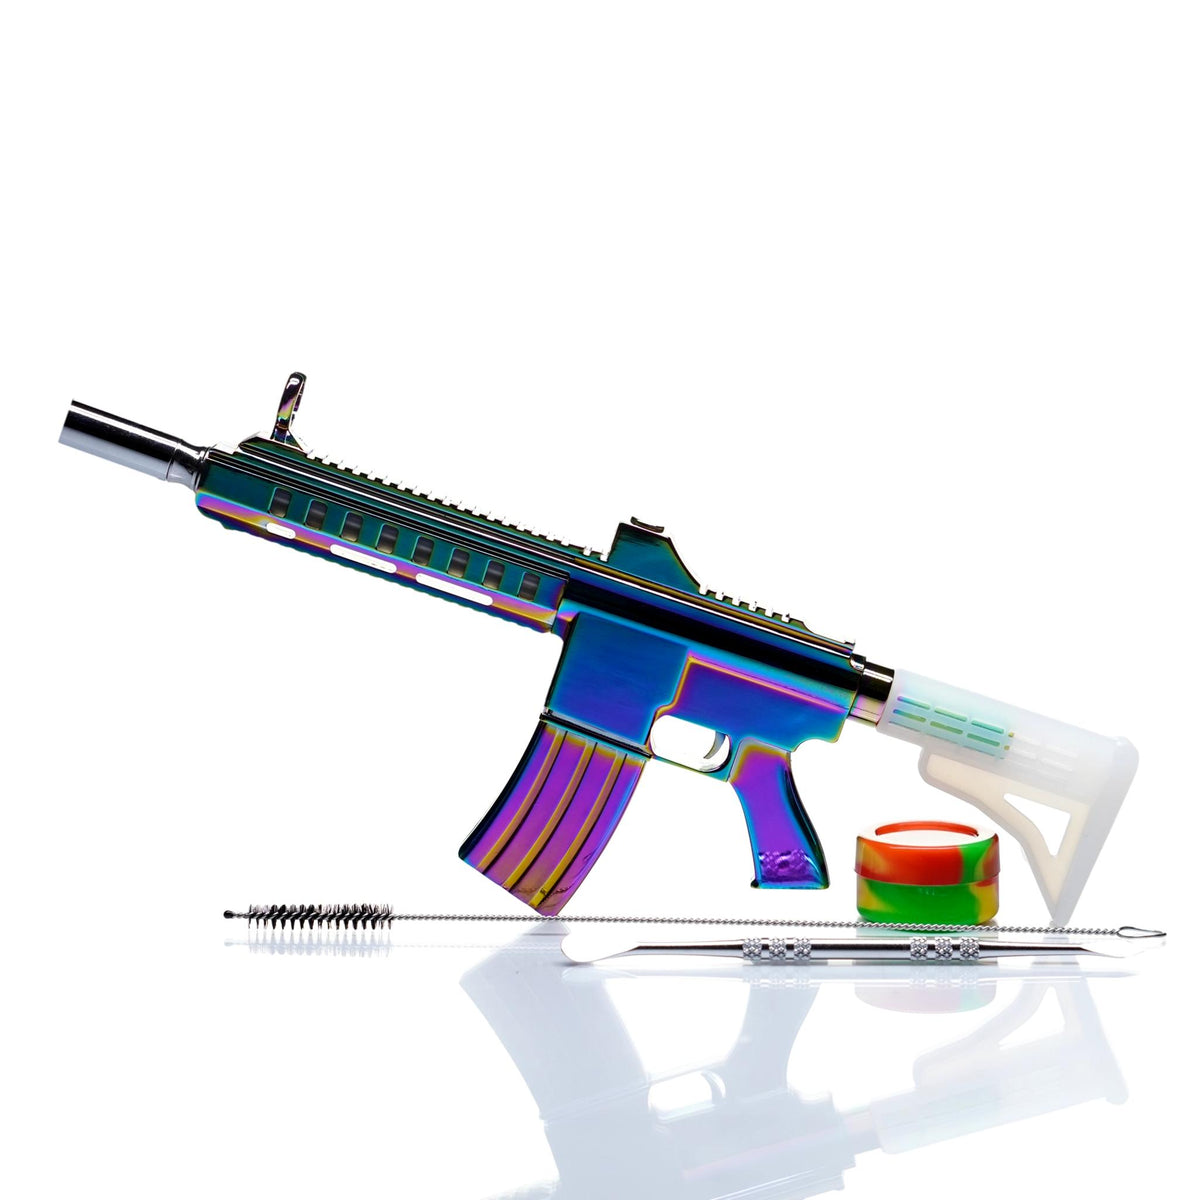 Get Wholesale Arsenal Gear AR-15 Styled Nectar Collectors – Got